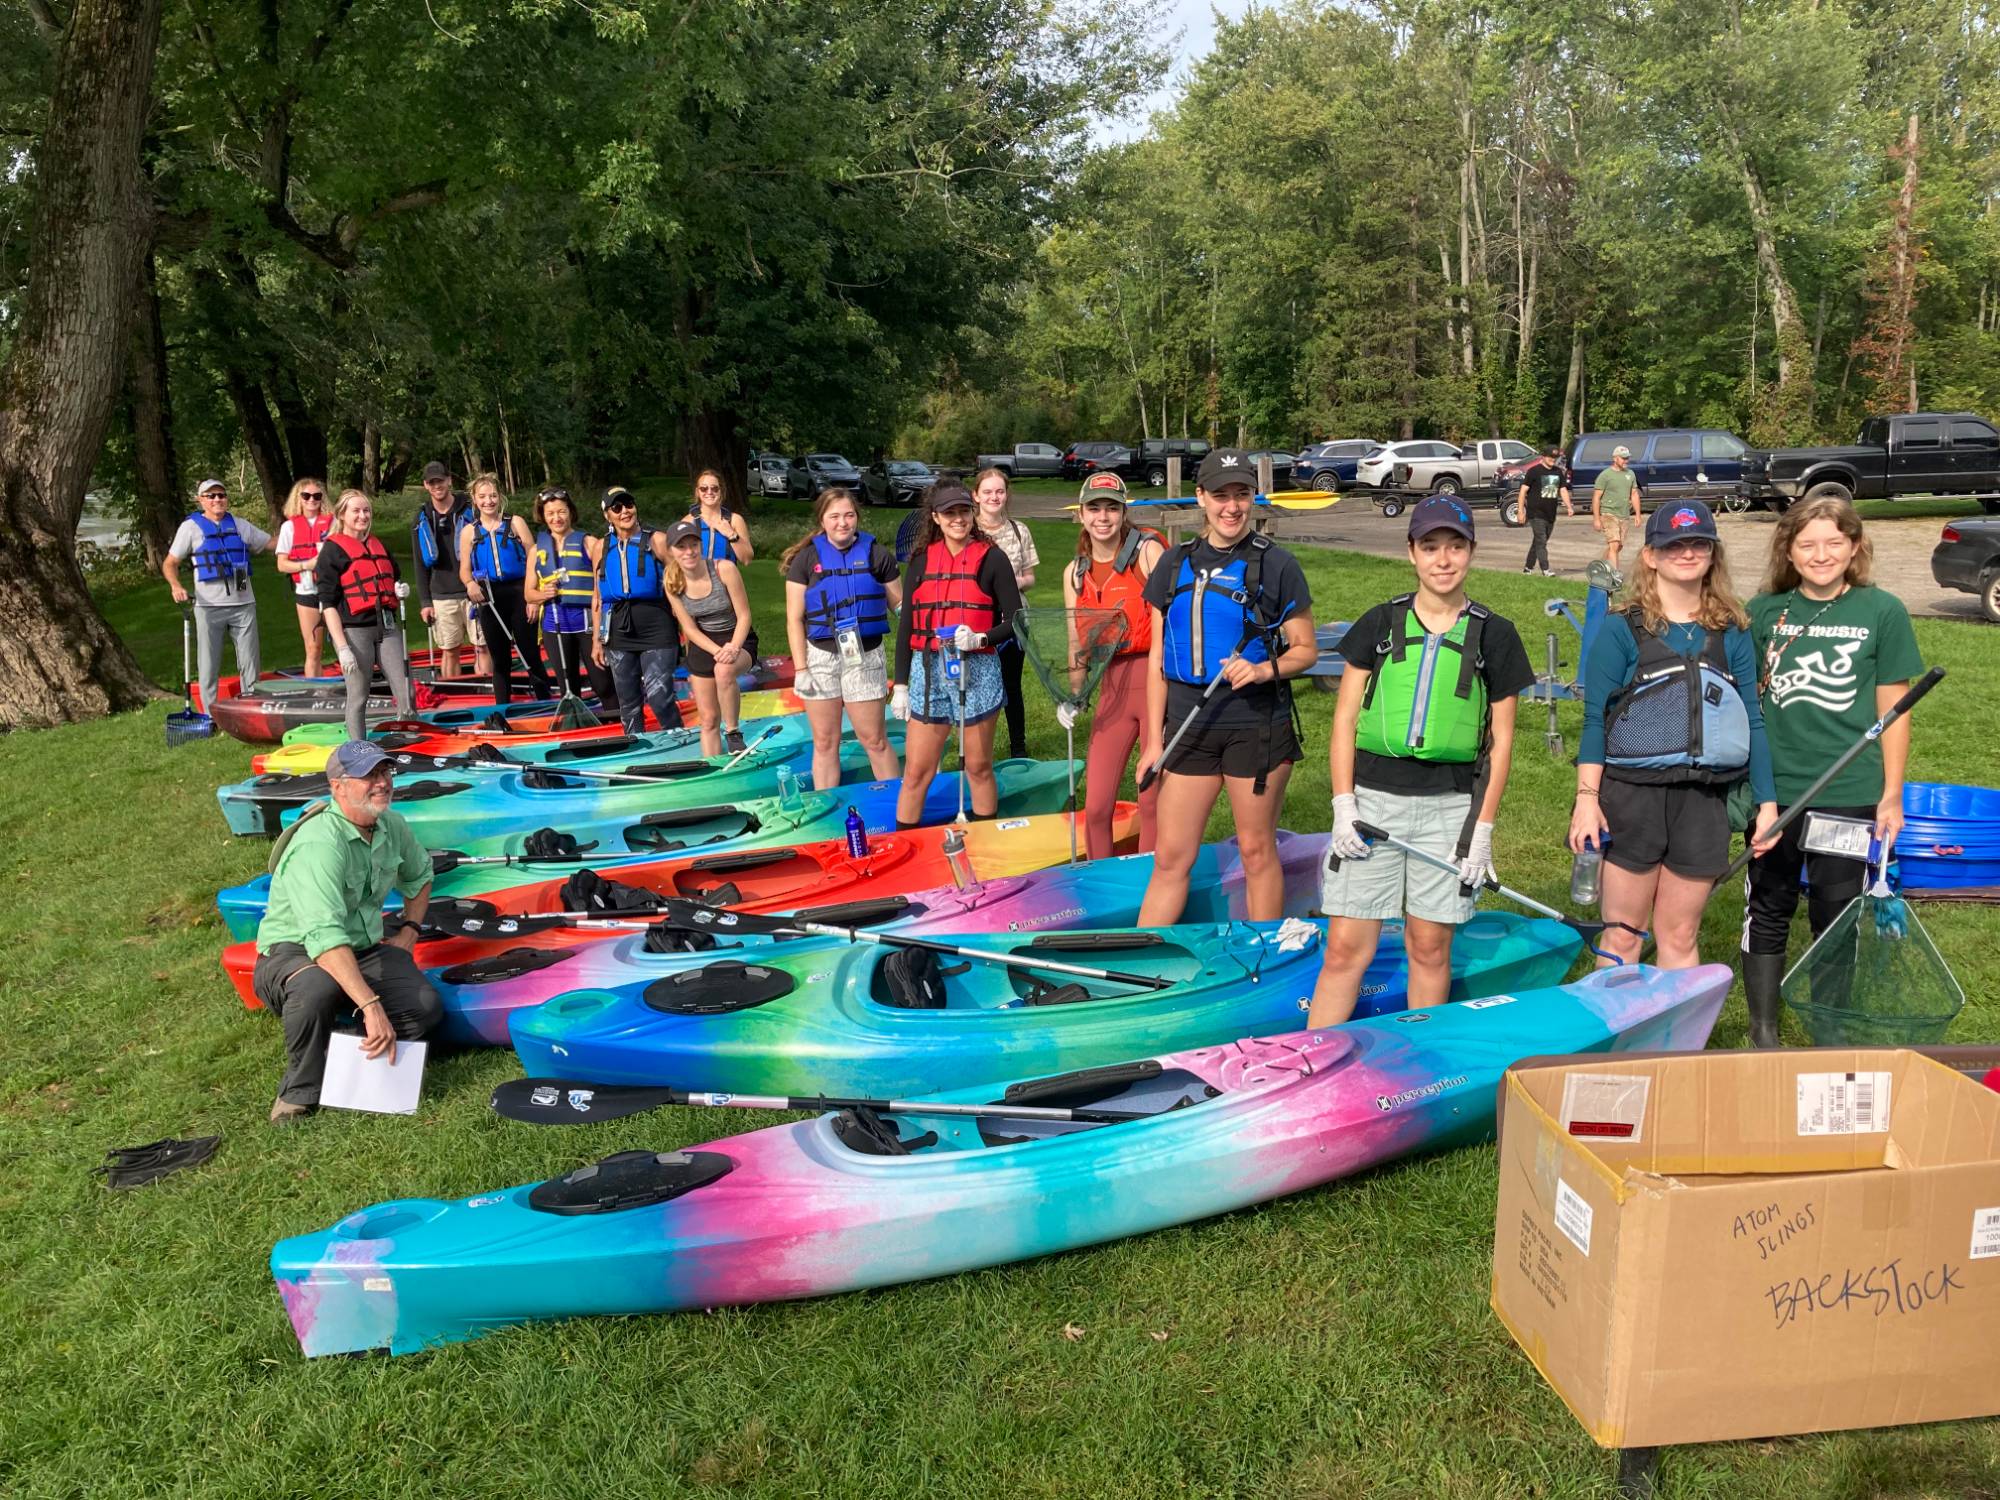 Veteran's Park Kayaks and Volunteers for Campus to Campus Cleanup